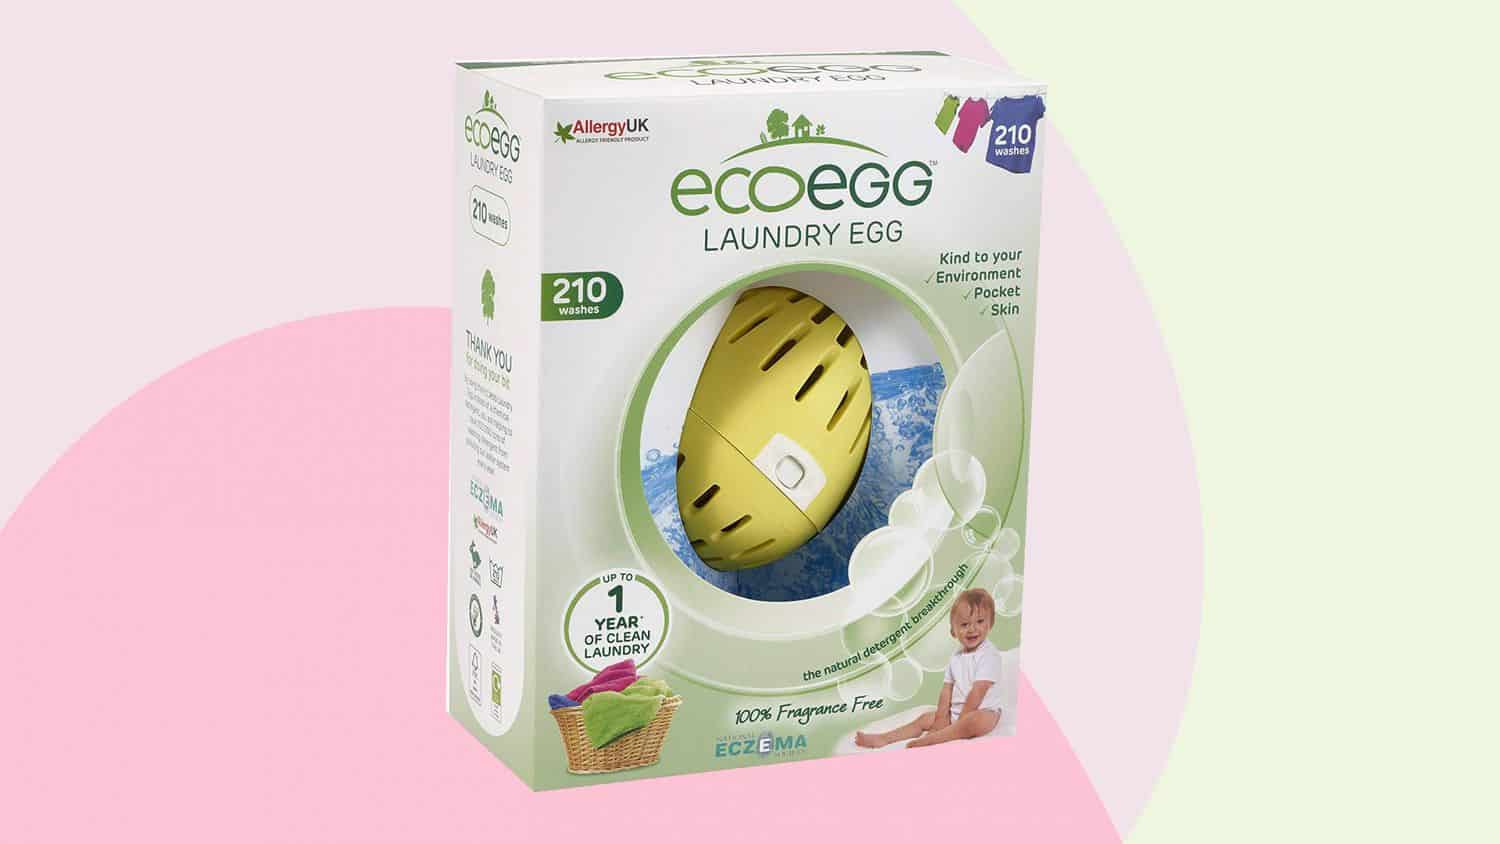 Ecoegg Laundry Egg: Everything You Need to Know About